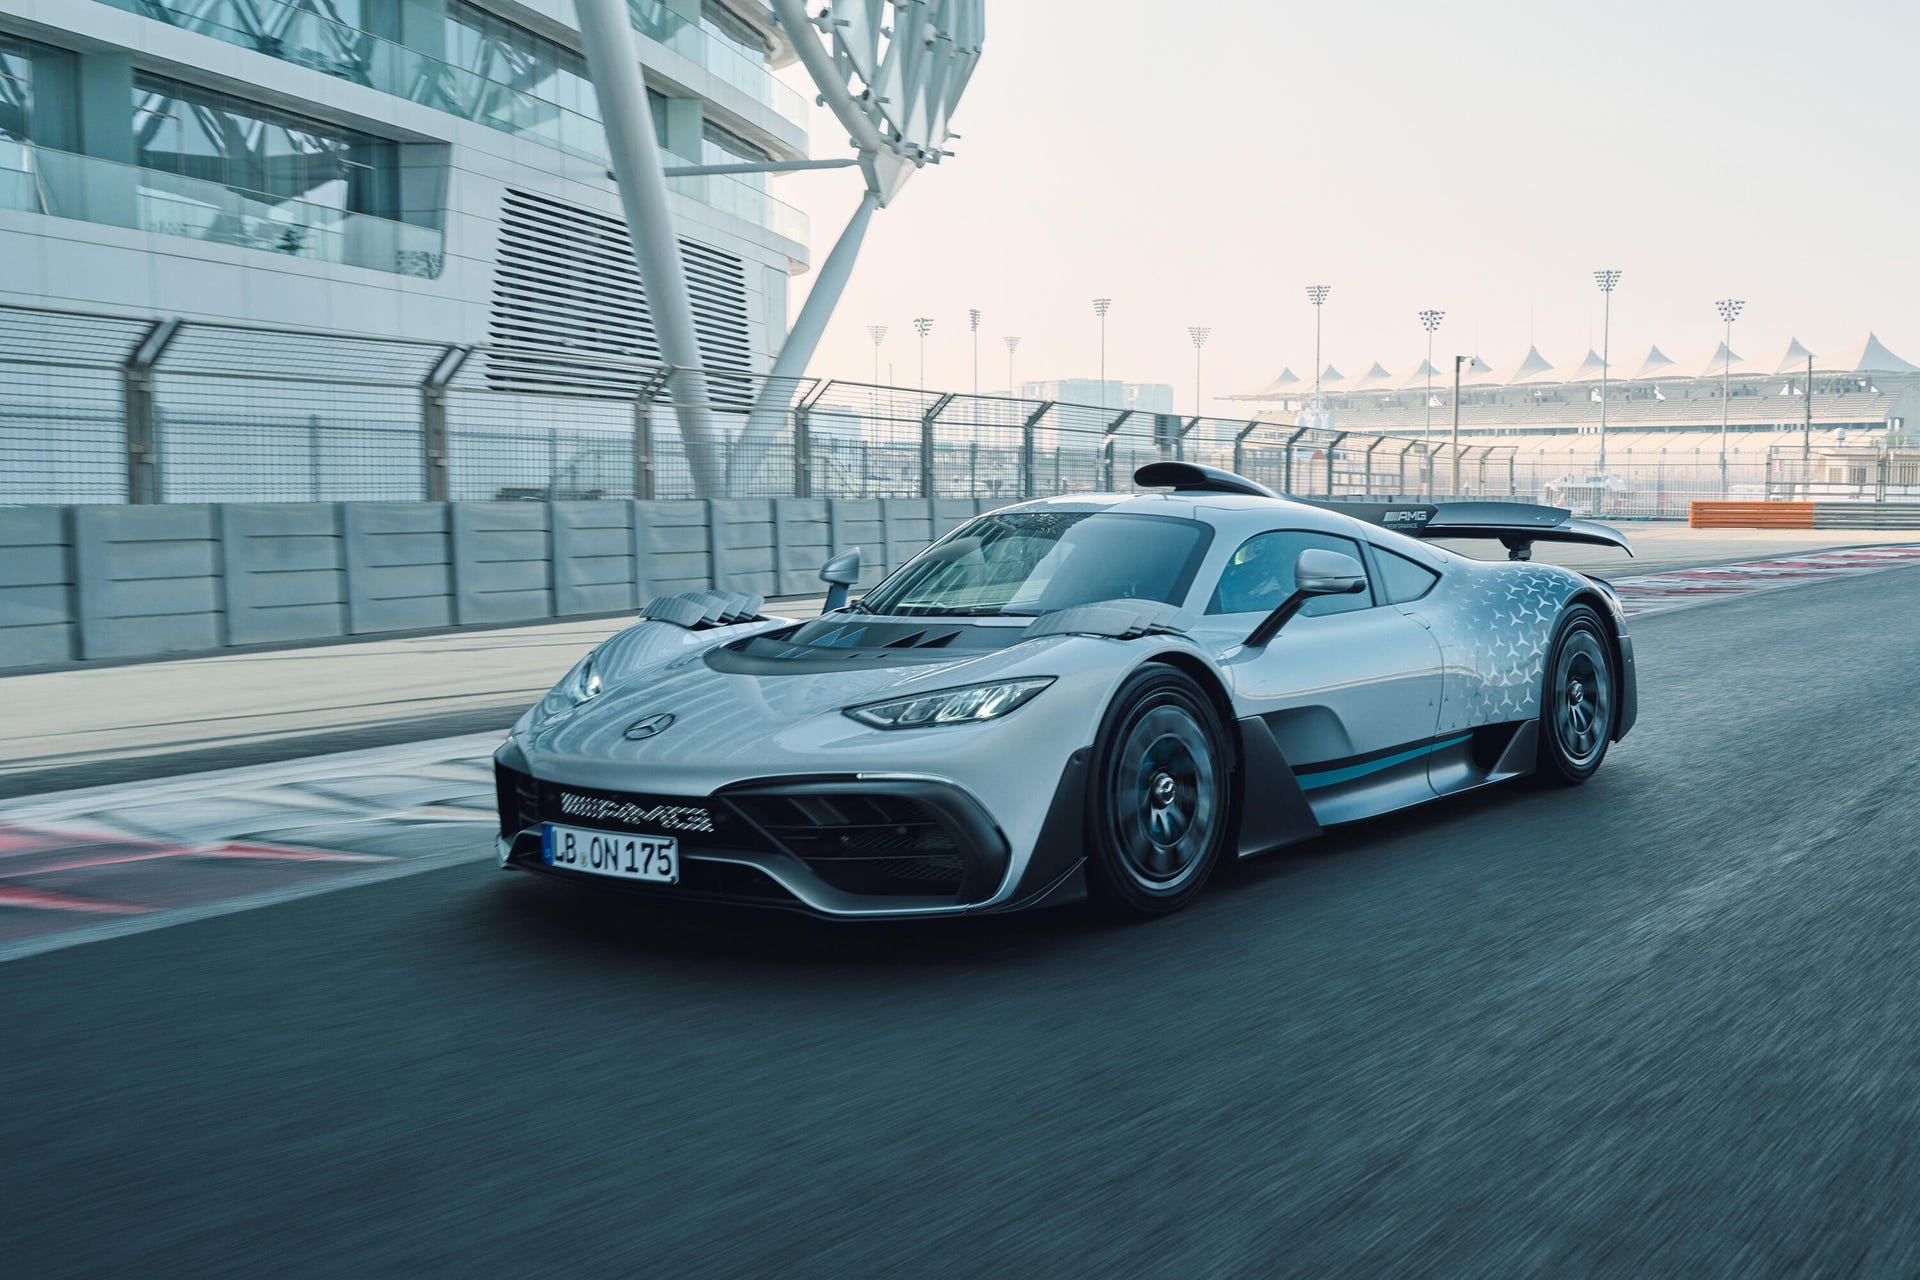 Mercedes-AMG One Hypercar parked on a track